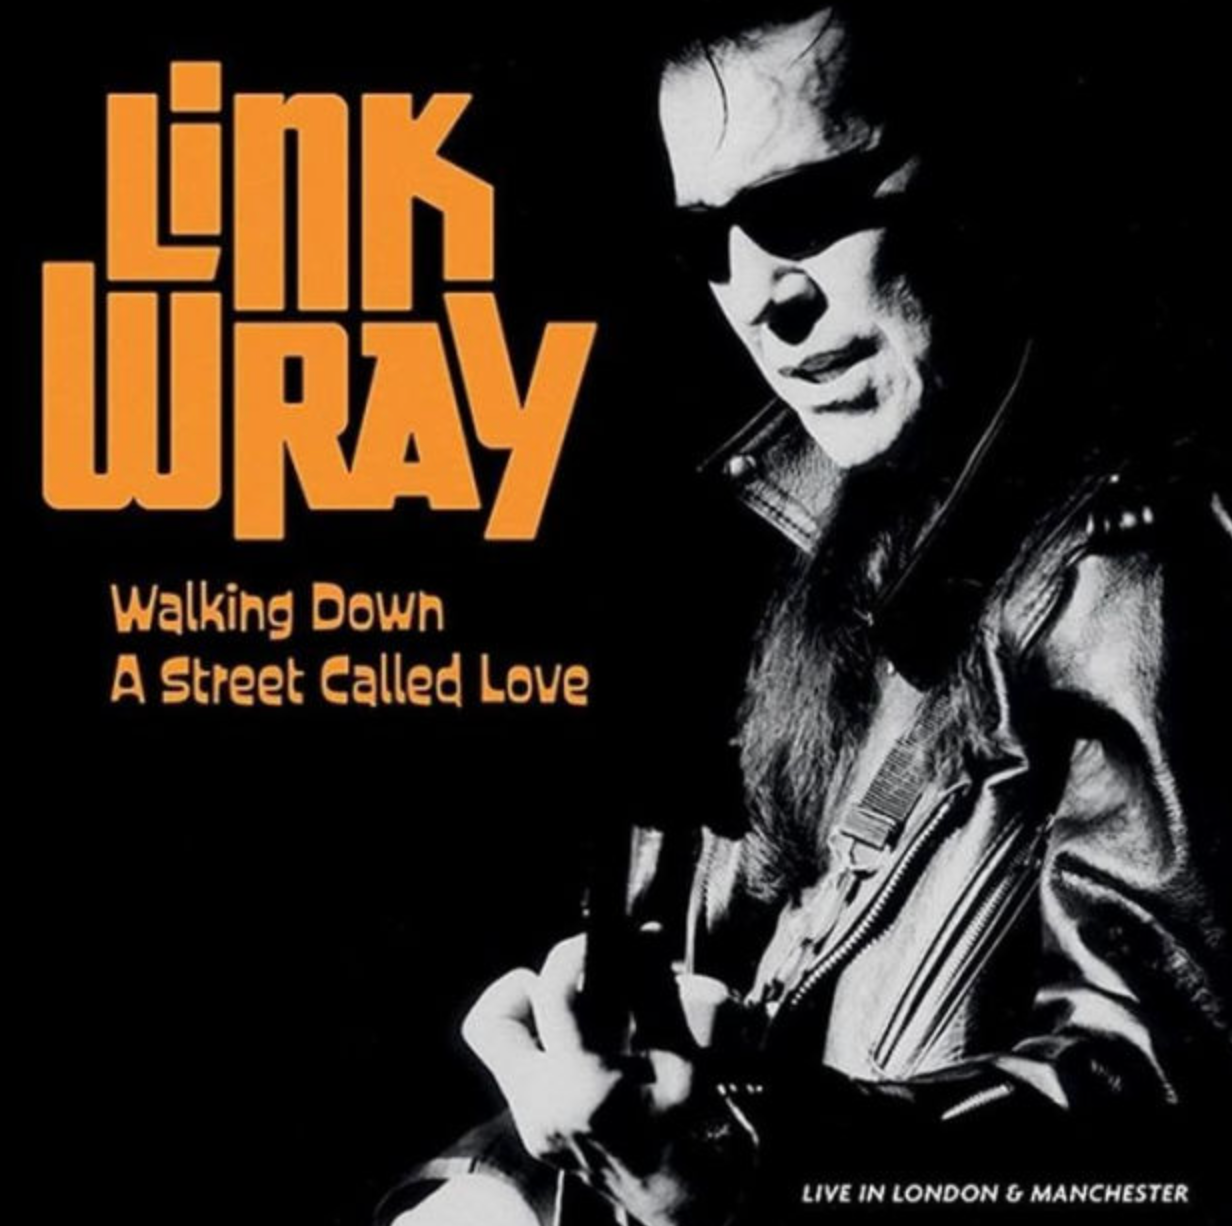 LINK WRAY - WALKING DOWN A STREET CALLED LOVE: LIVE IN LONDON & MANCHESTER - 2-LP - VINYL LP